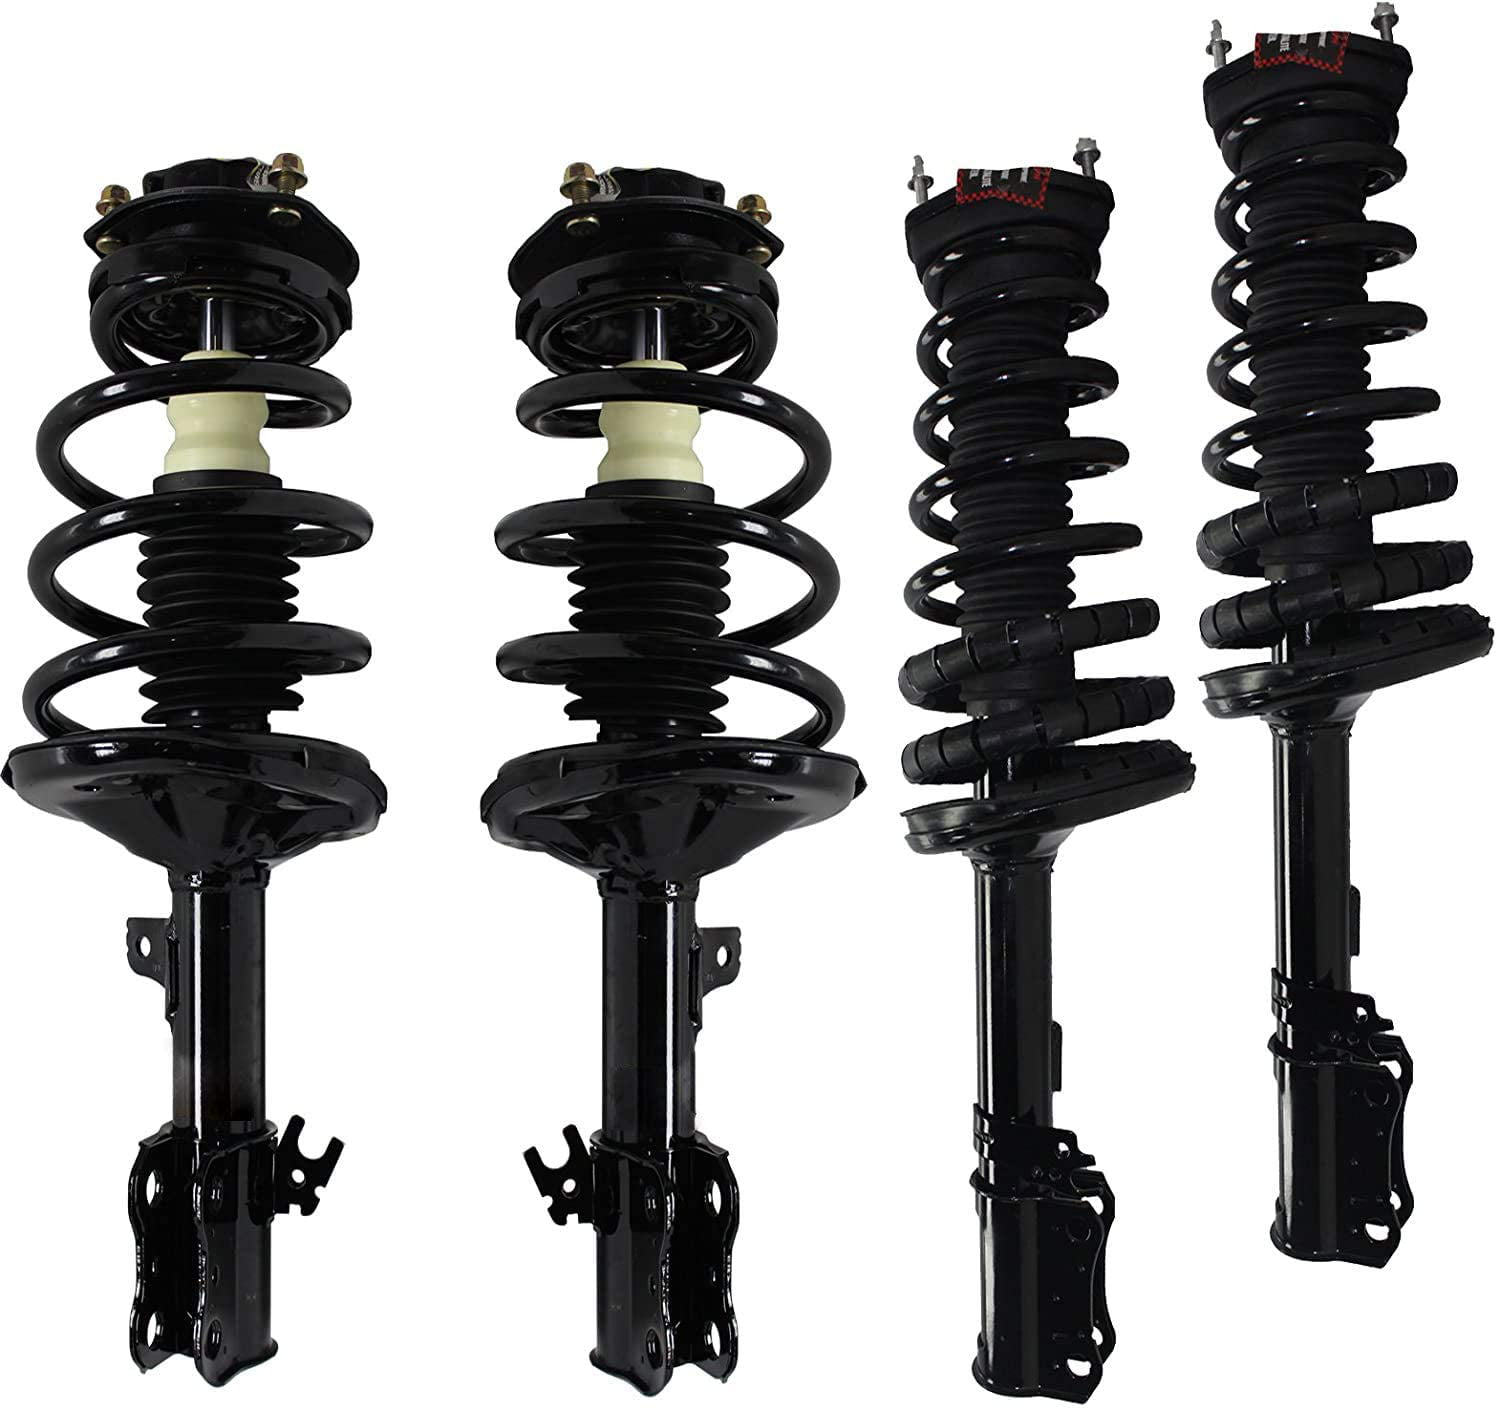 Front Pair SCITOO Complete Strut Coil Spring Assembly Replacement Struts Shocks Fit for 1997-2001 Lexus Es300,1997-2001 Toyota Camry,1997-2003 Toyota Avalon,1999-2003 Toyota Solara 